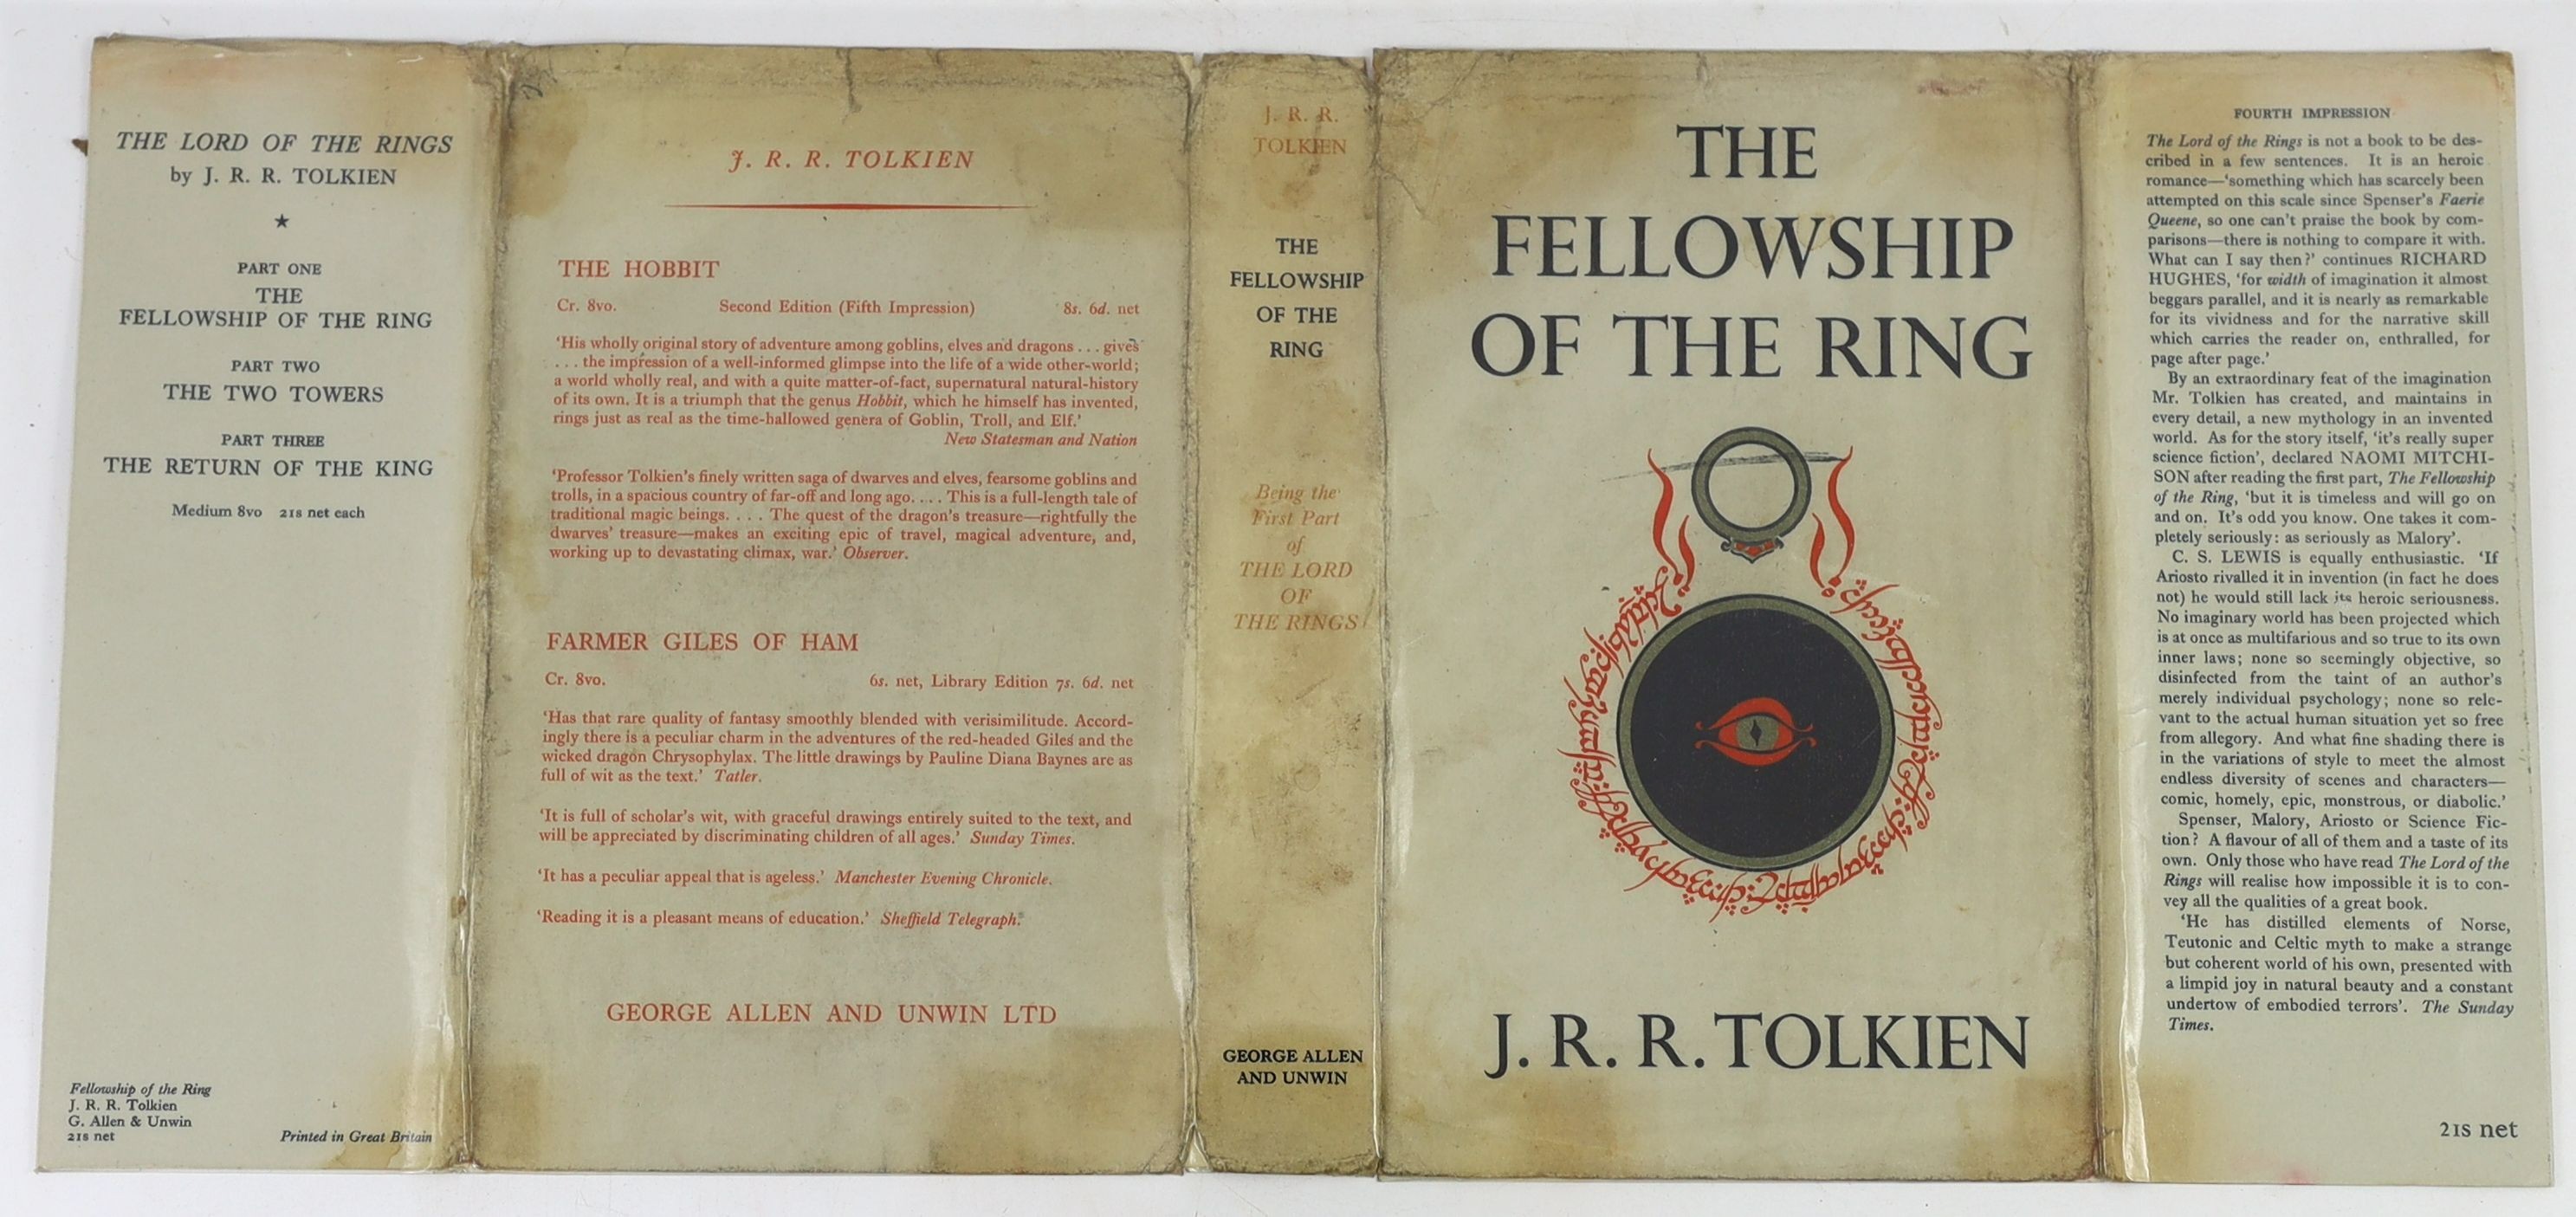 Tolkien, John Ronald Reuel - The Lord of the Rings, 4th impressions of The Fellowship of the Ring, in slightly torn and discoloured d/j, and The Two Towers, d/j torn in half and with 50% loss to spine, ownership inscript